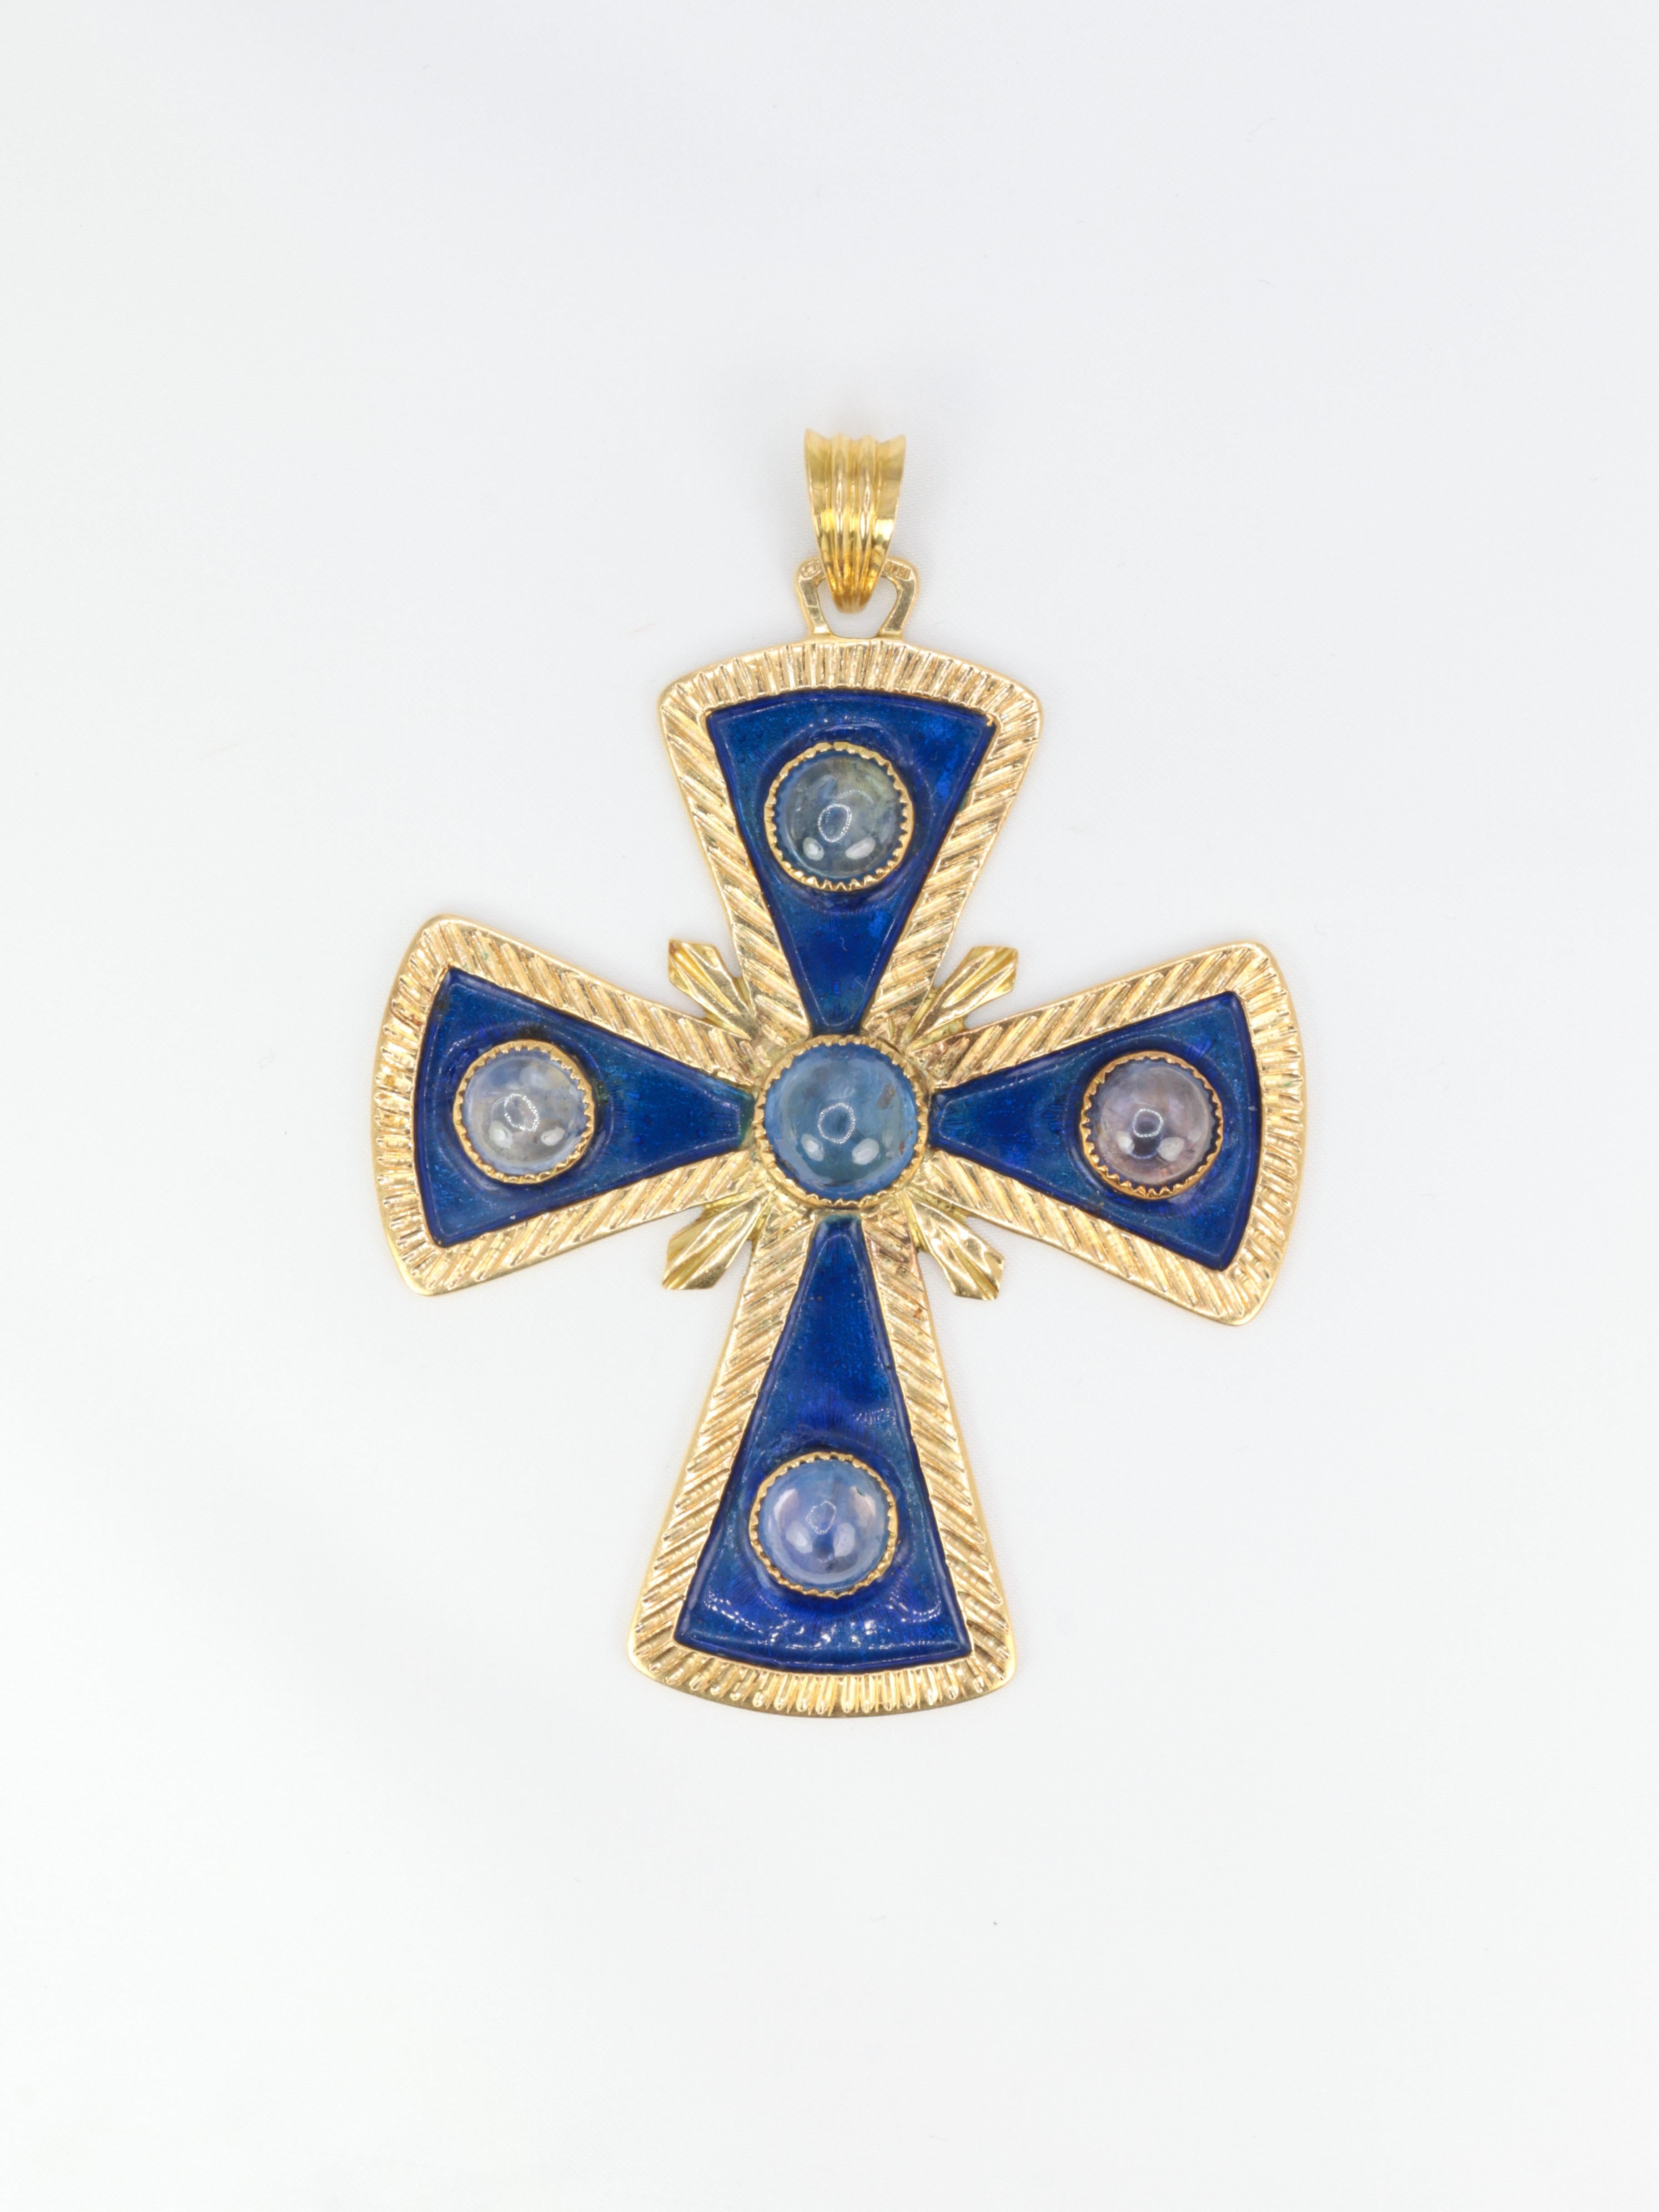 Pendant Pectoral cross in 18k gold (750°/°°) decorated with blue enamel and set with large sapphire cabochons for a total weight of about 15 ct. The back of the cross is finely chased.
Italian work of very good quality circa 1970
Presence of the